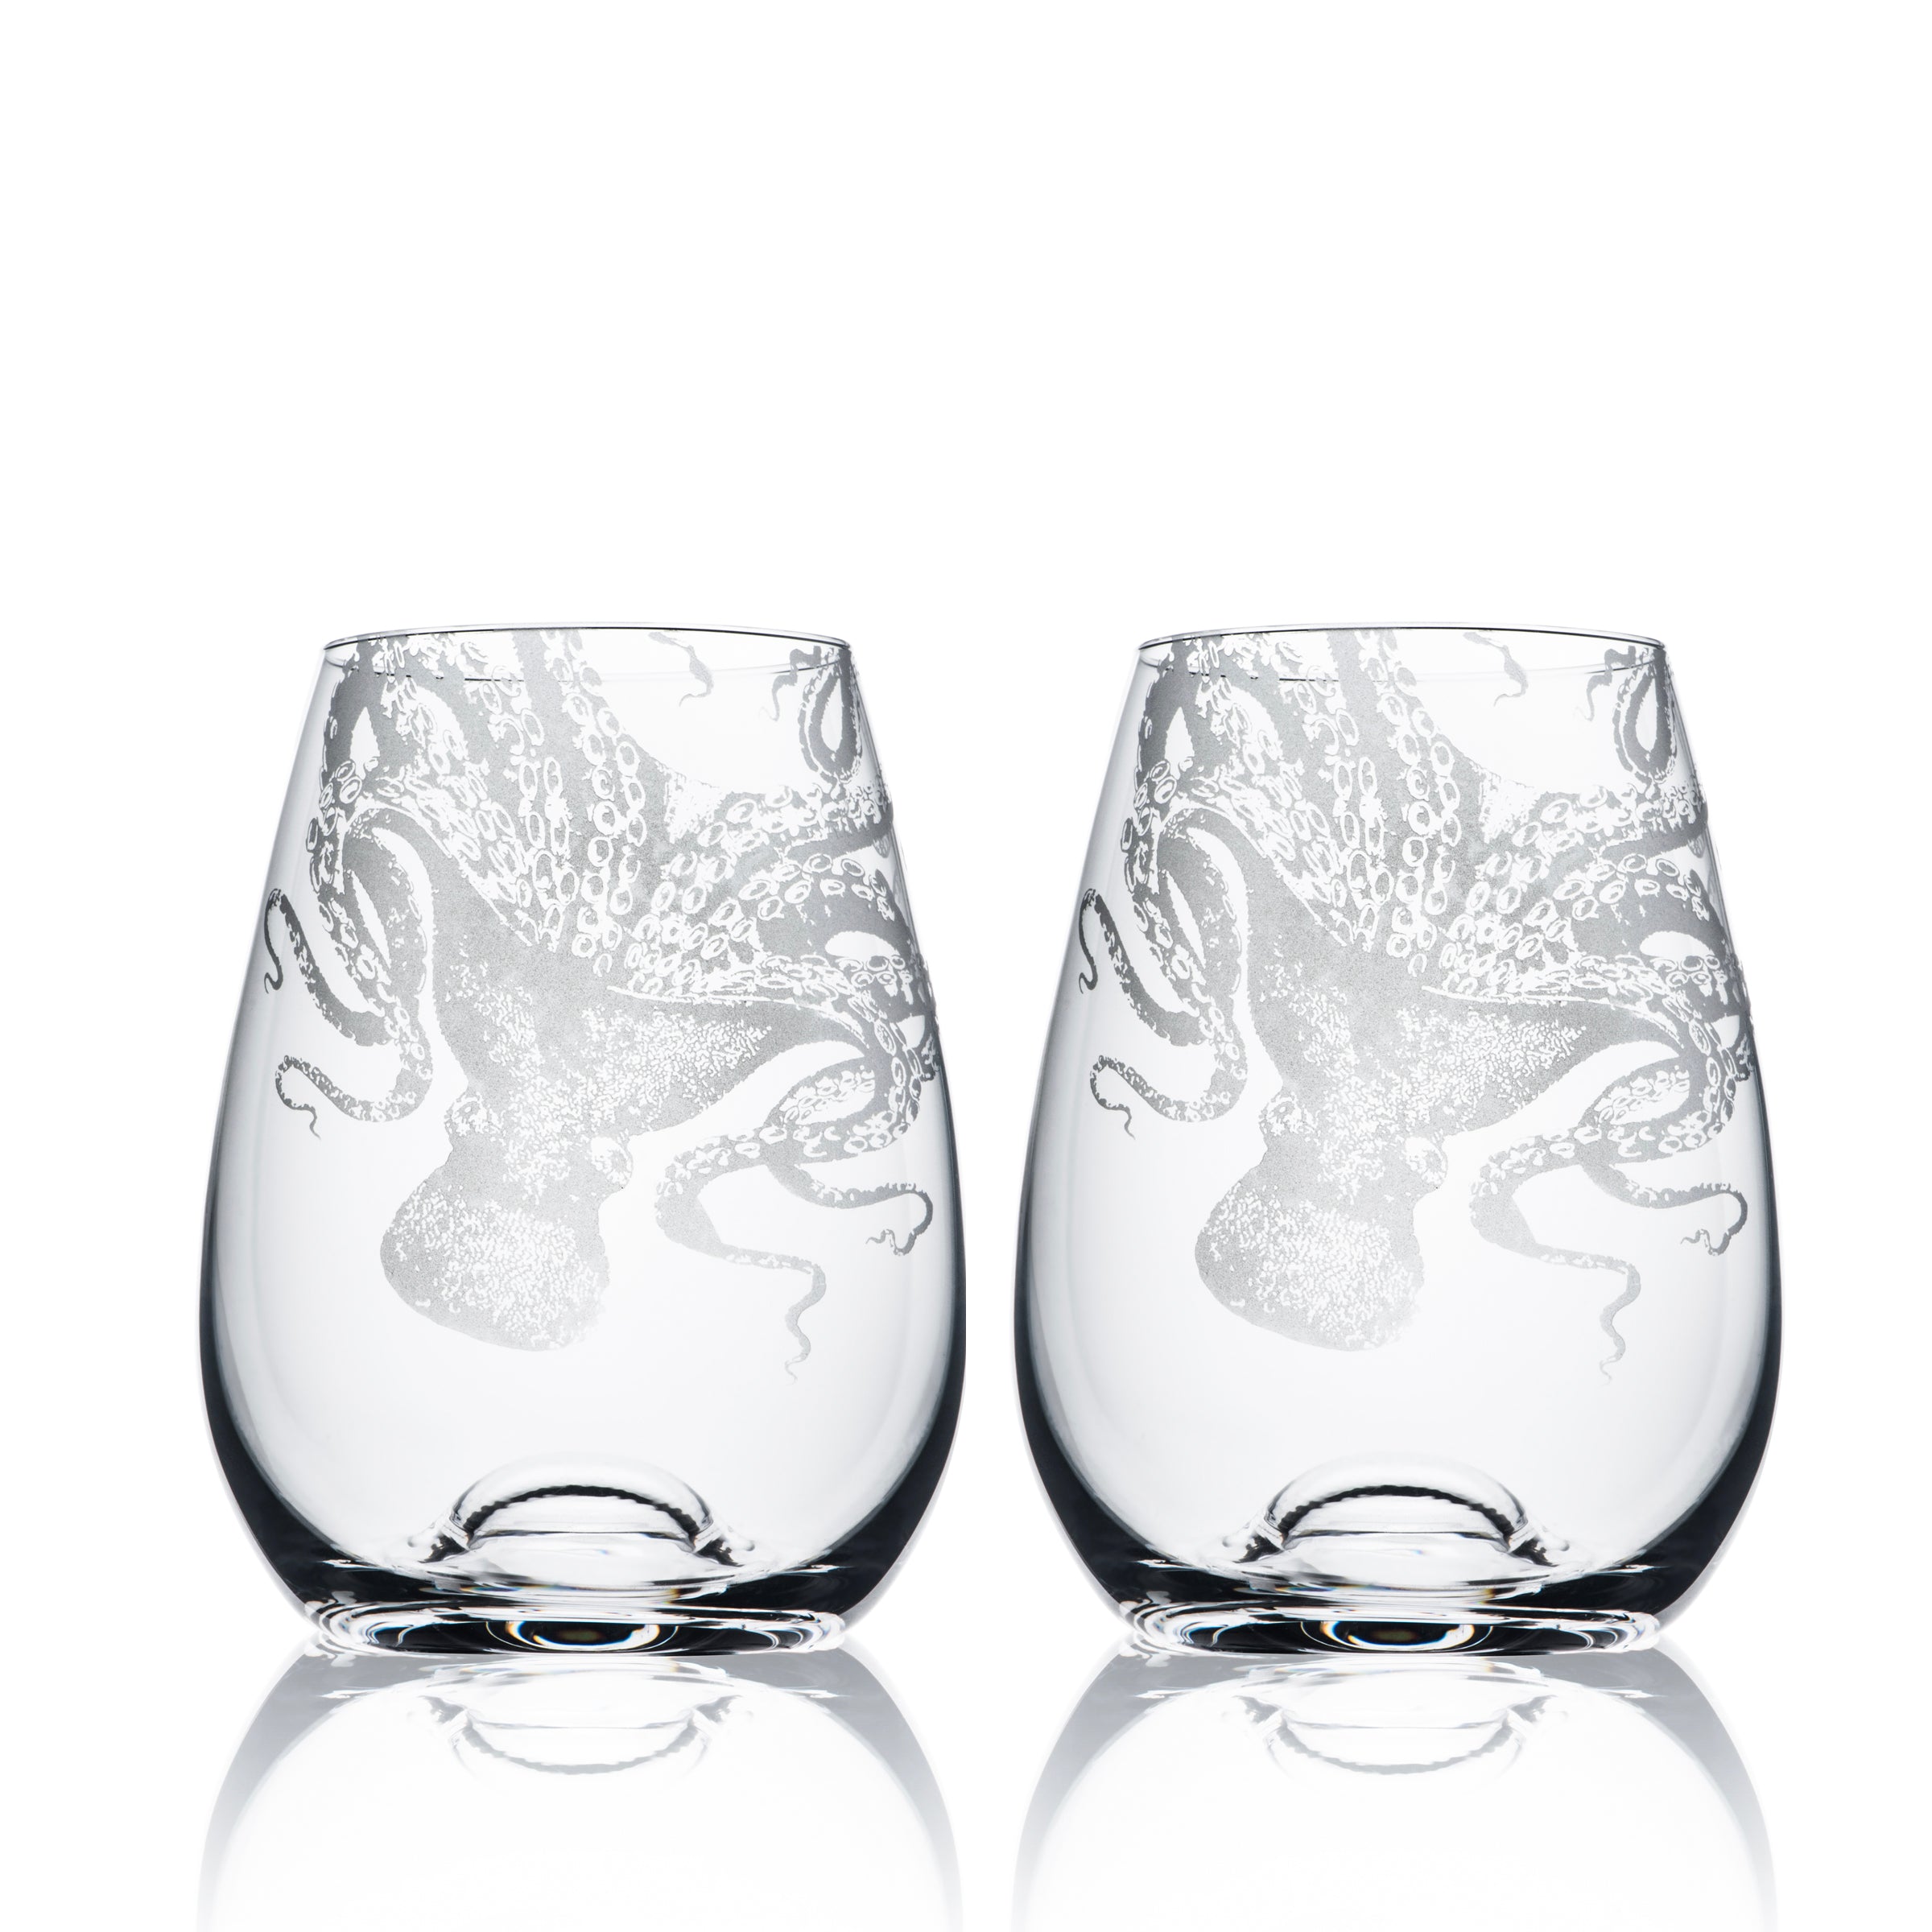 Lucy Stemless Wine Glasses